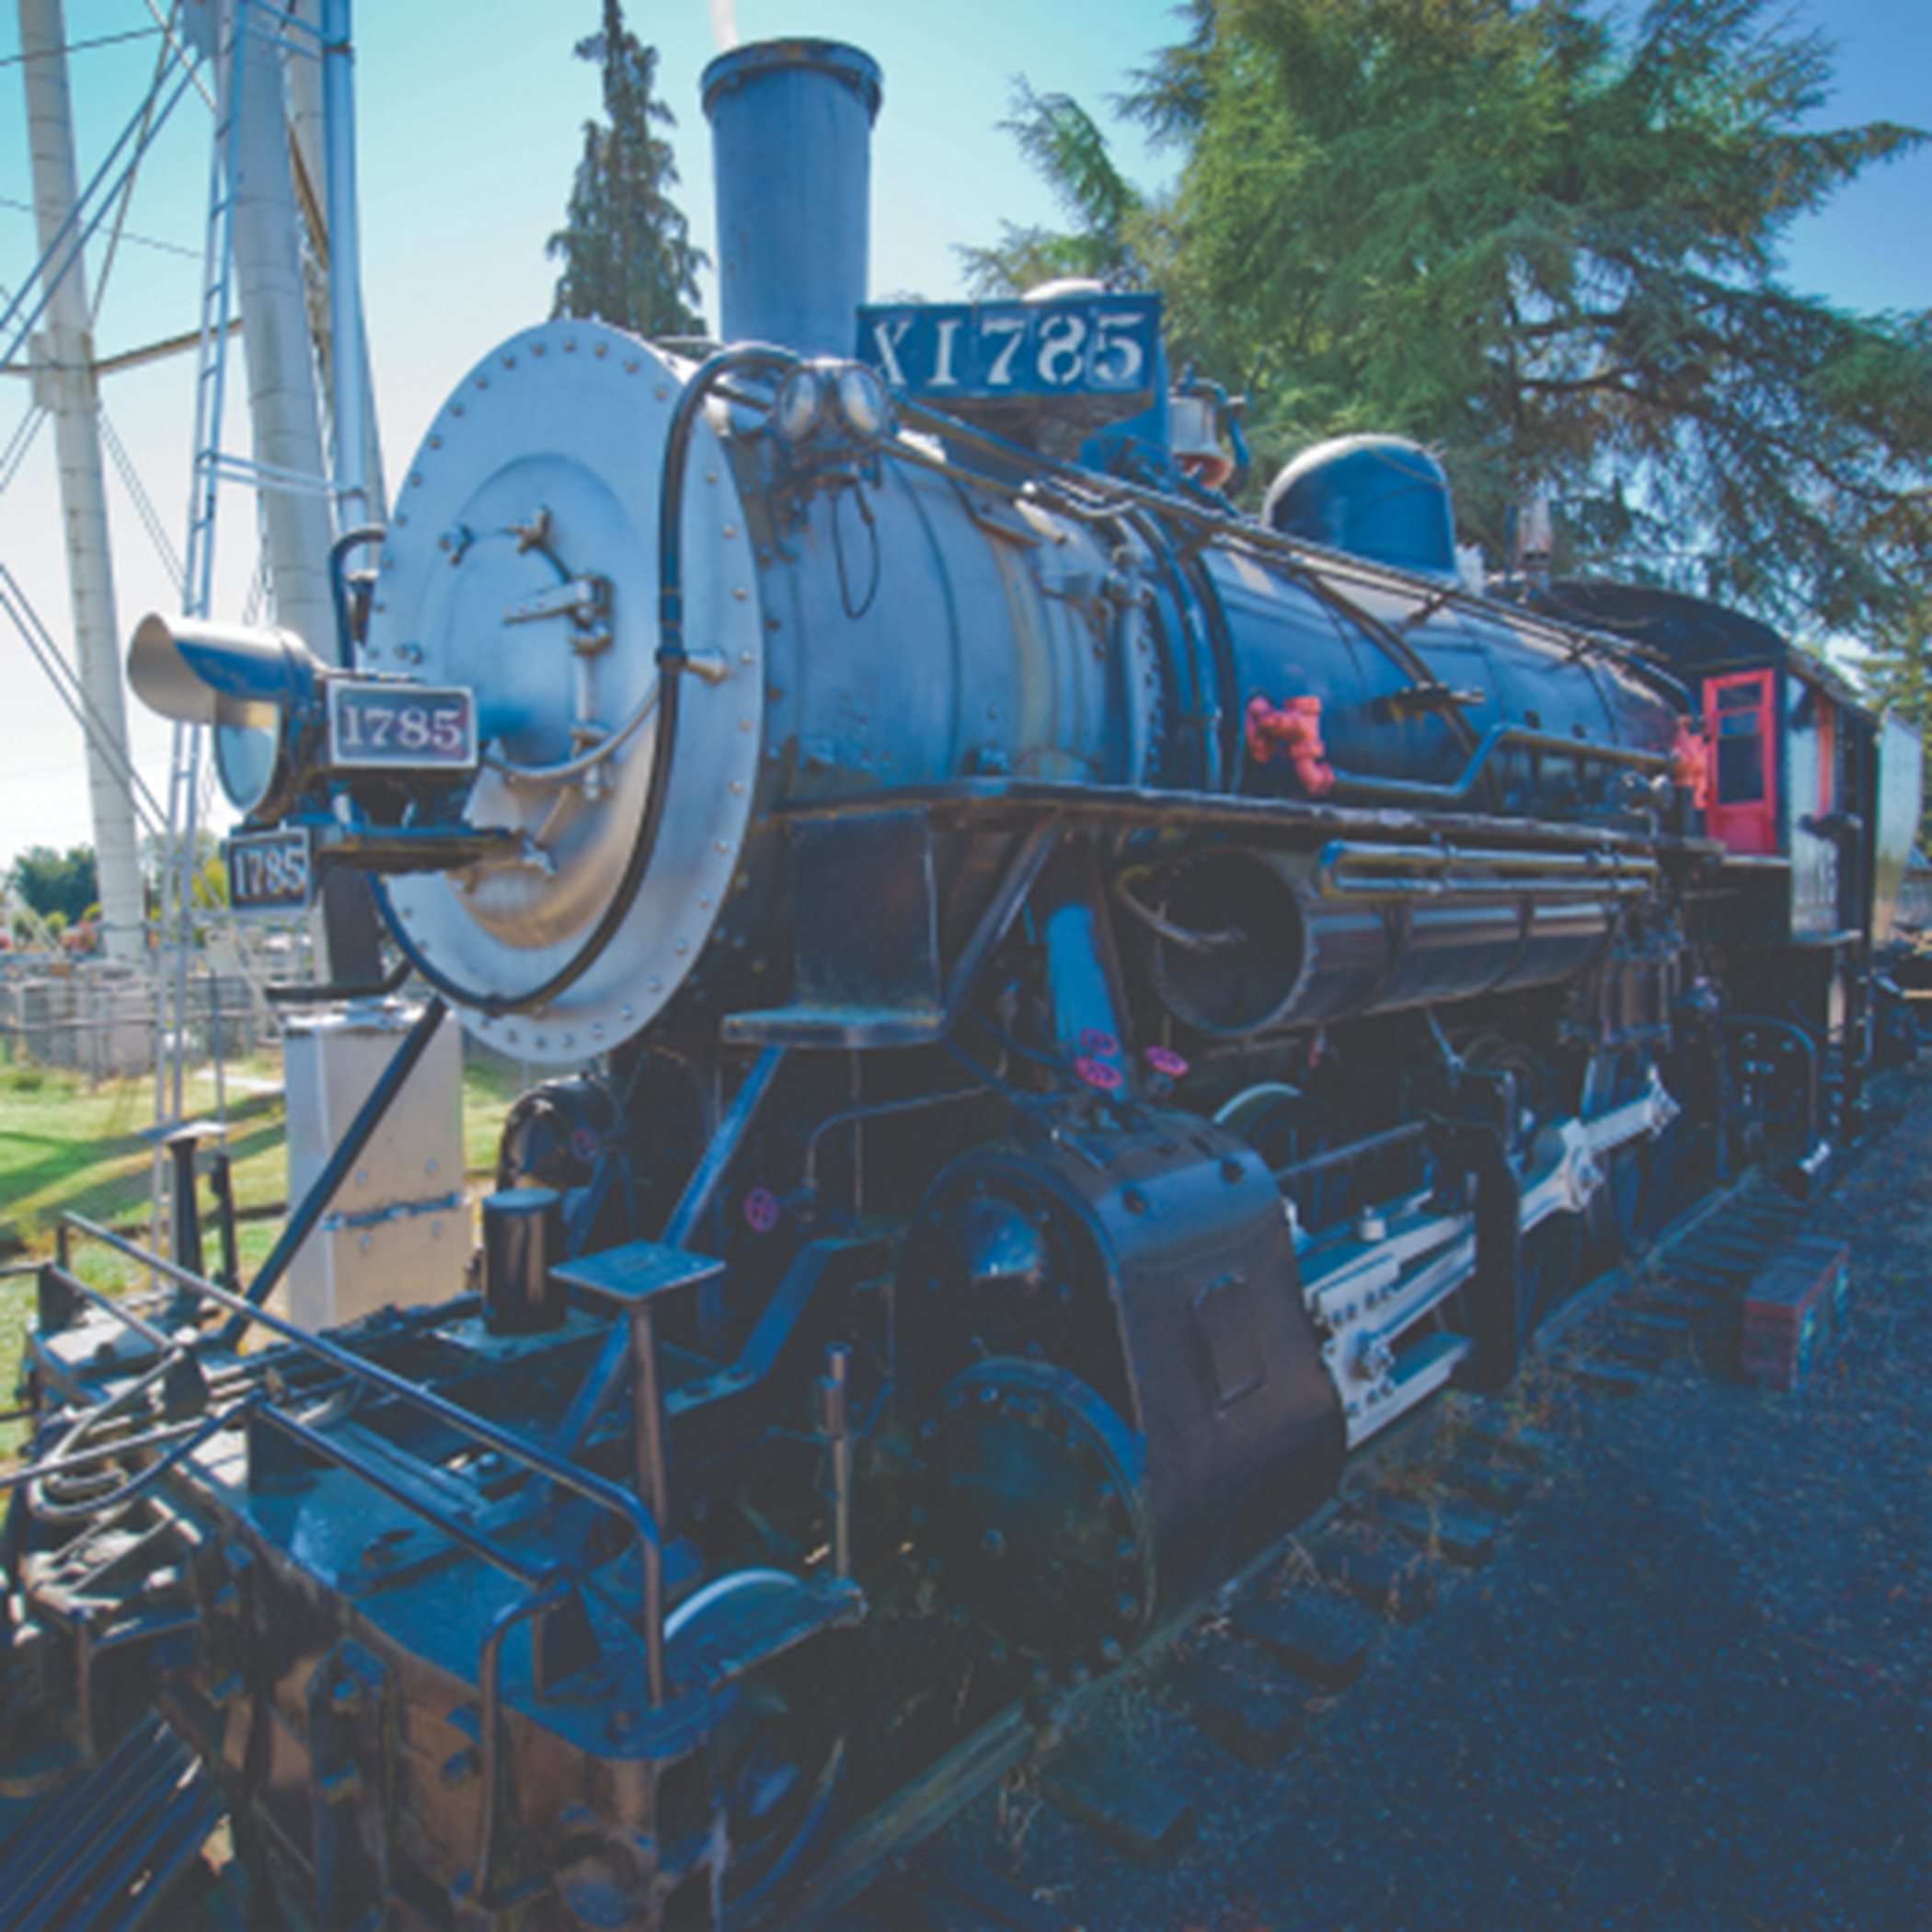 Historic 1785 Southern Pacific Locomotive